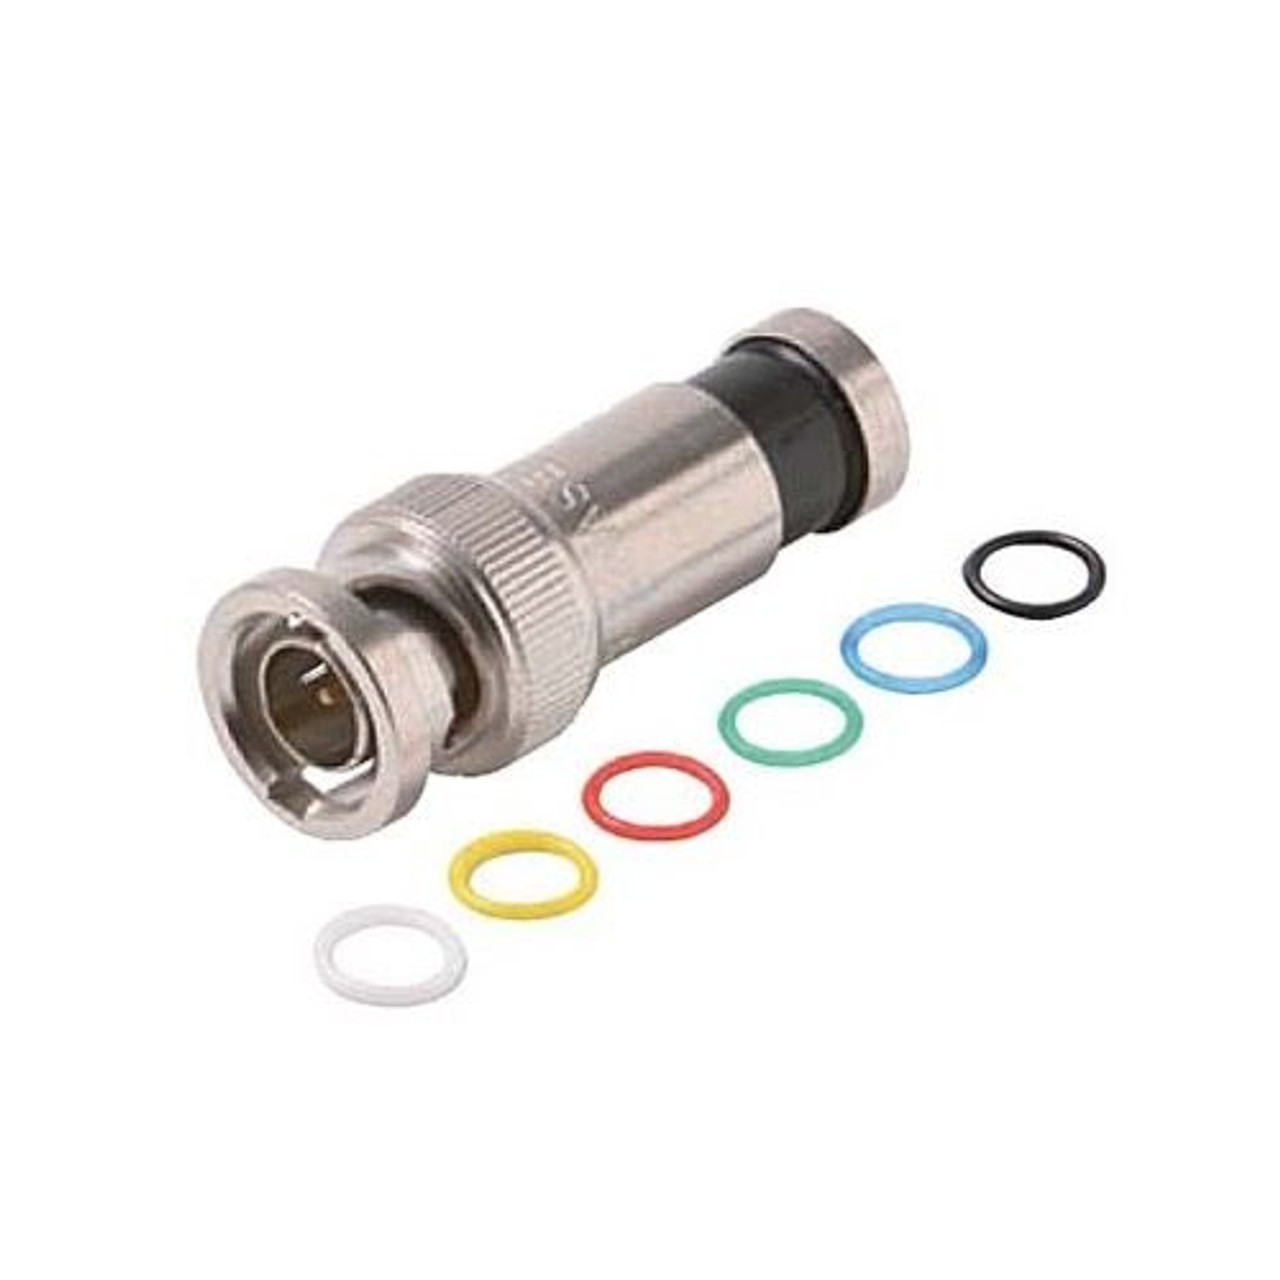 Steren 200-167 BNC RG6 Compression Connector with Color Bands BNC to F Coax RG-6 Plug Male Snap-N-Seal Adapter, RF Digital Audio Video Component, PermaSeal Commercial Grade, Multi-Color ID Rings